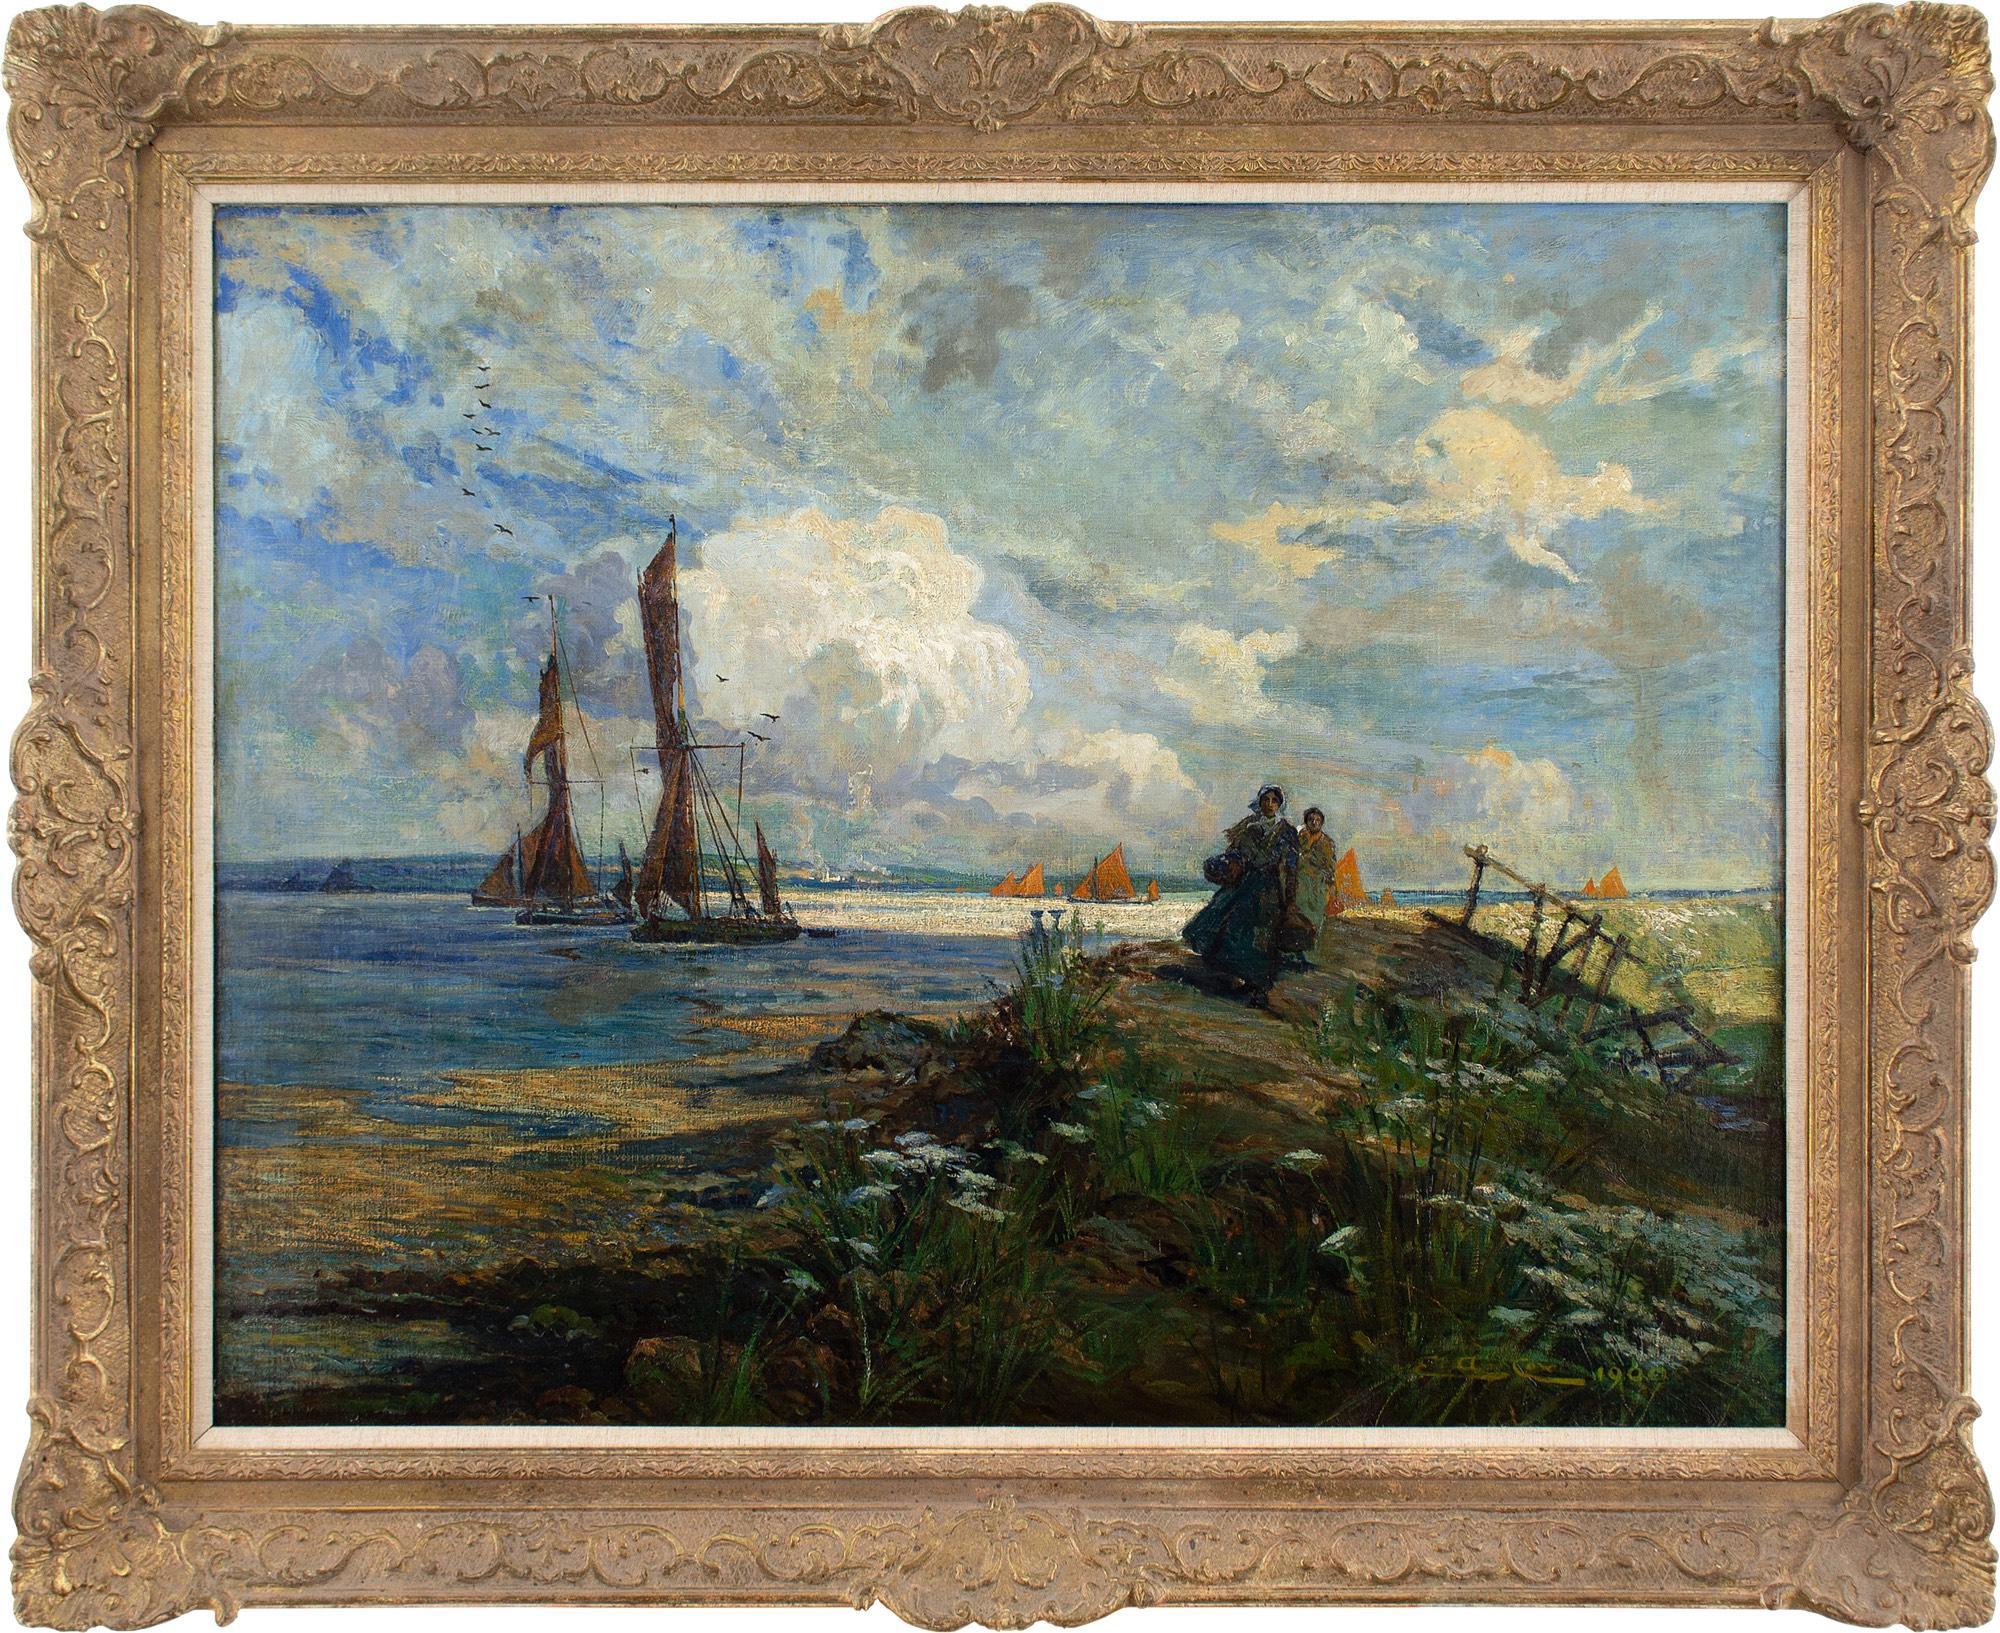 This early 20th-century oil painting by British artist Elijah Albert Cox (1870-1955) depicts a vibrant coastal scene with fishermen’s wives and the returning fleet.

Under a restless sky abundant with disparate clouds, two fishing boats head for the